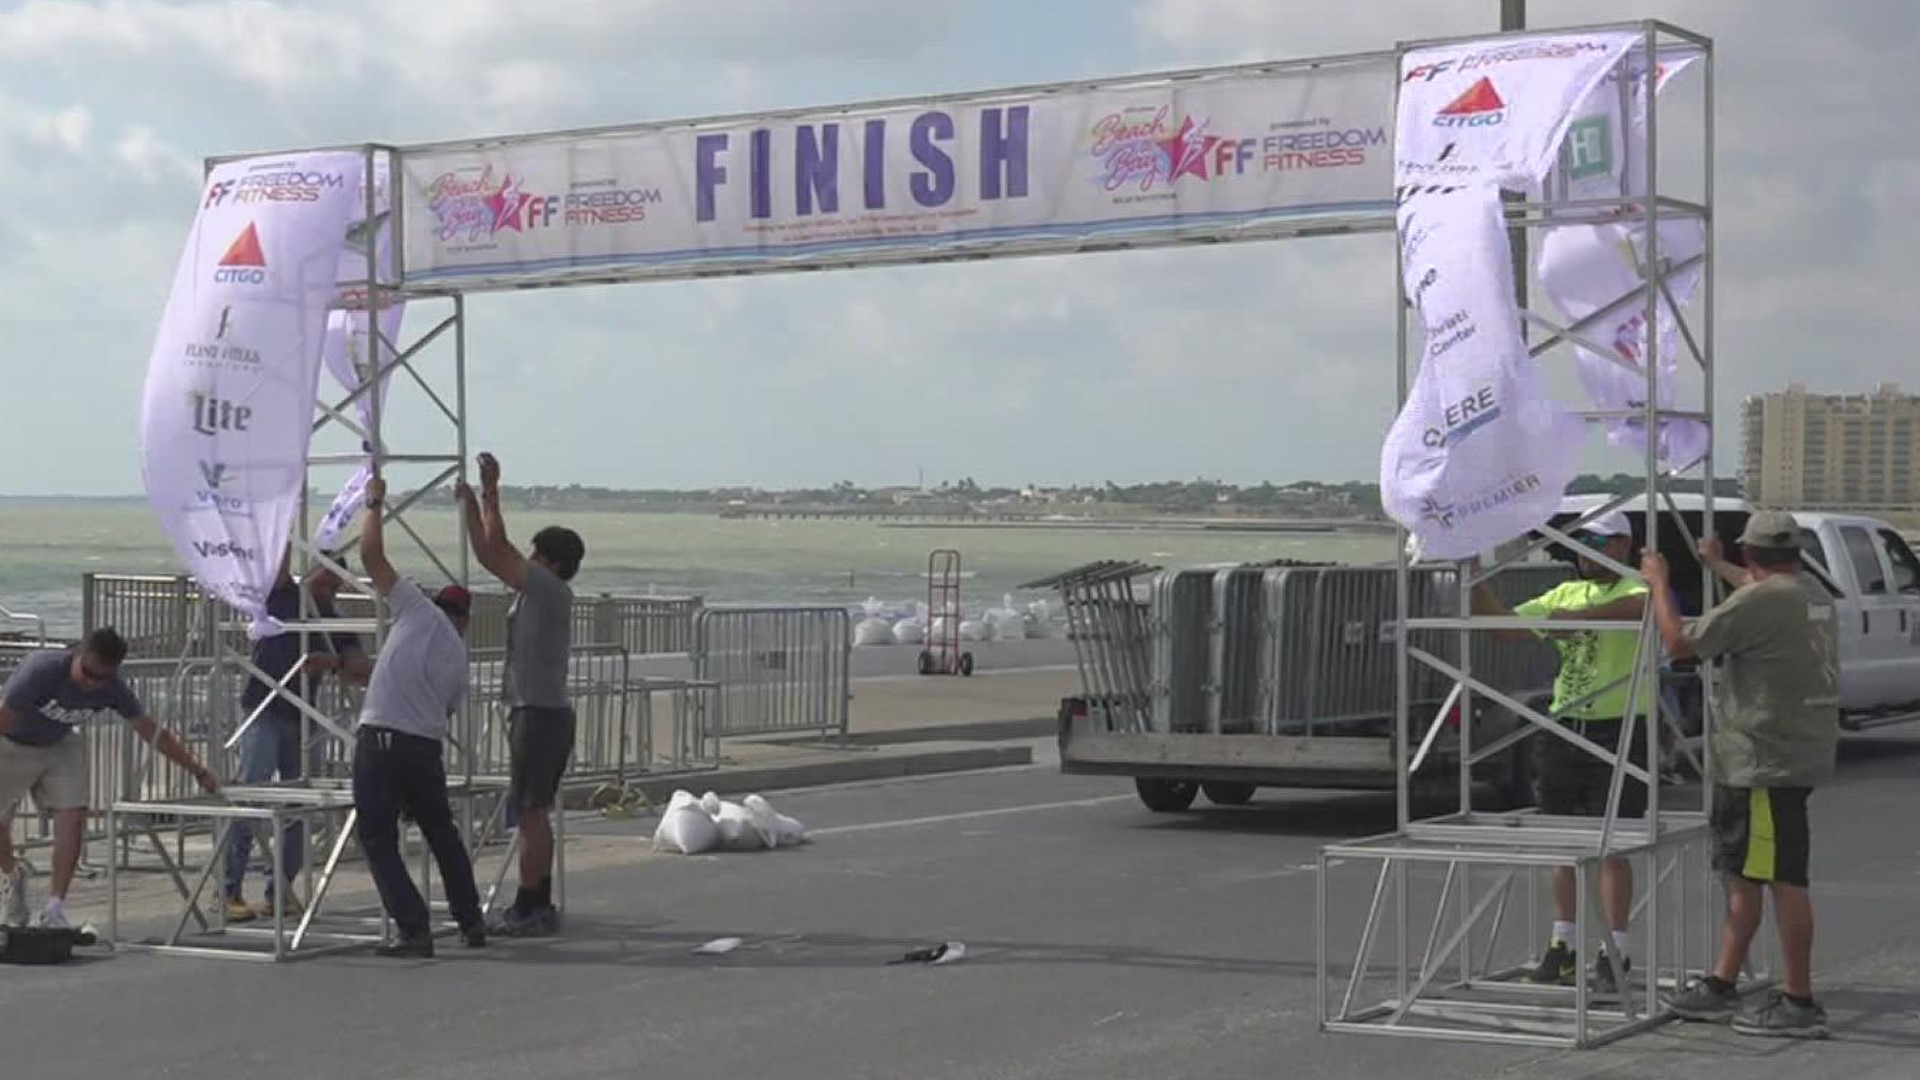 The 45th annual 'Beach to Bay Relay Marathon' is back for the first time since the pandemic began. The marathon kicks off Saturday morning at 7:00 a.m.